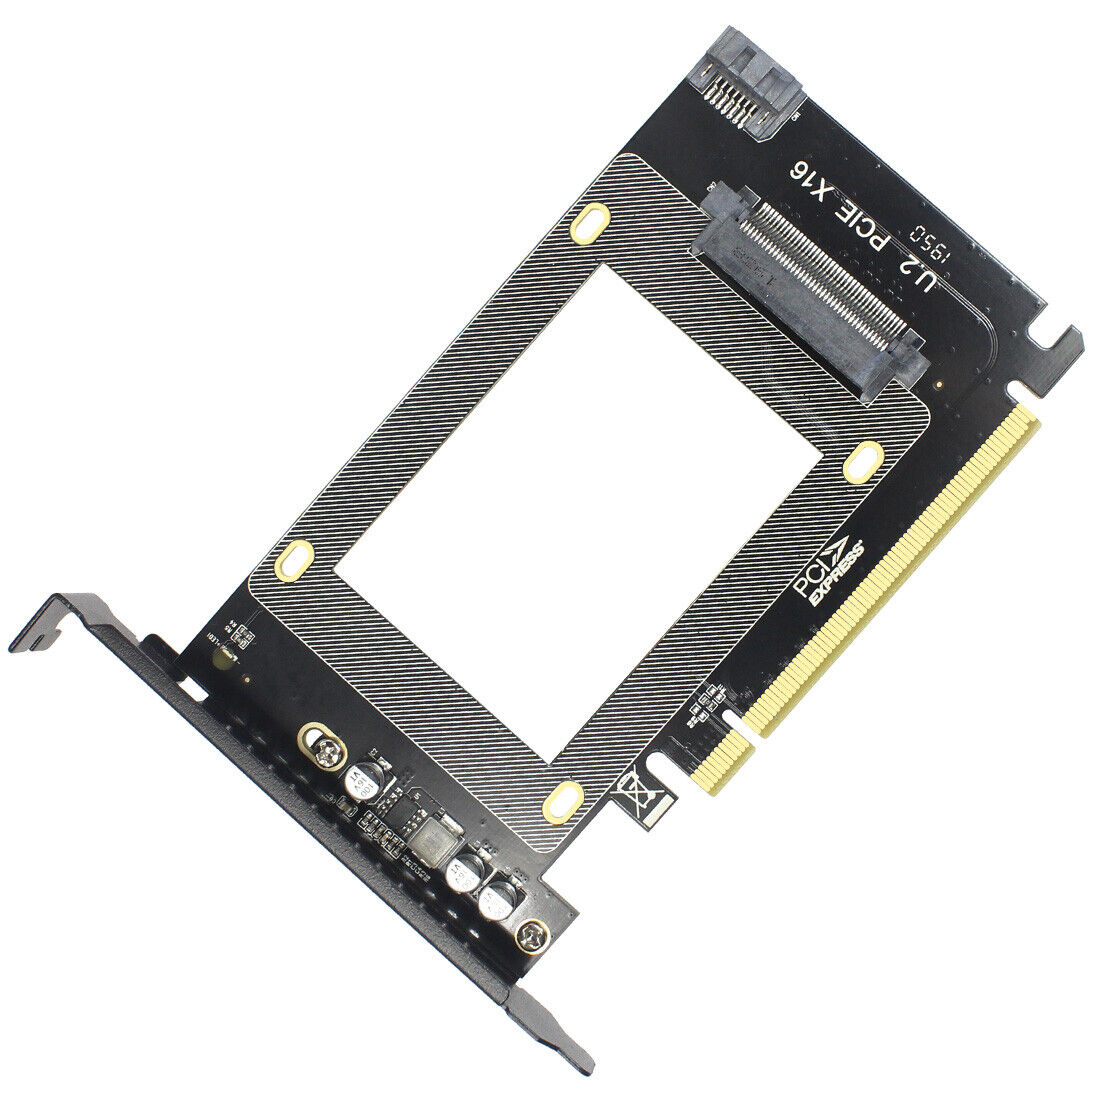 JEYI U.2 SSD to PCIe X16 3.0 Adapter SFF-8639 PCIe Adapter for 2.5